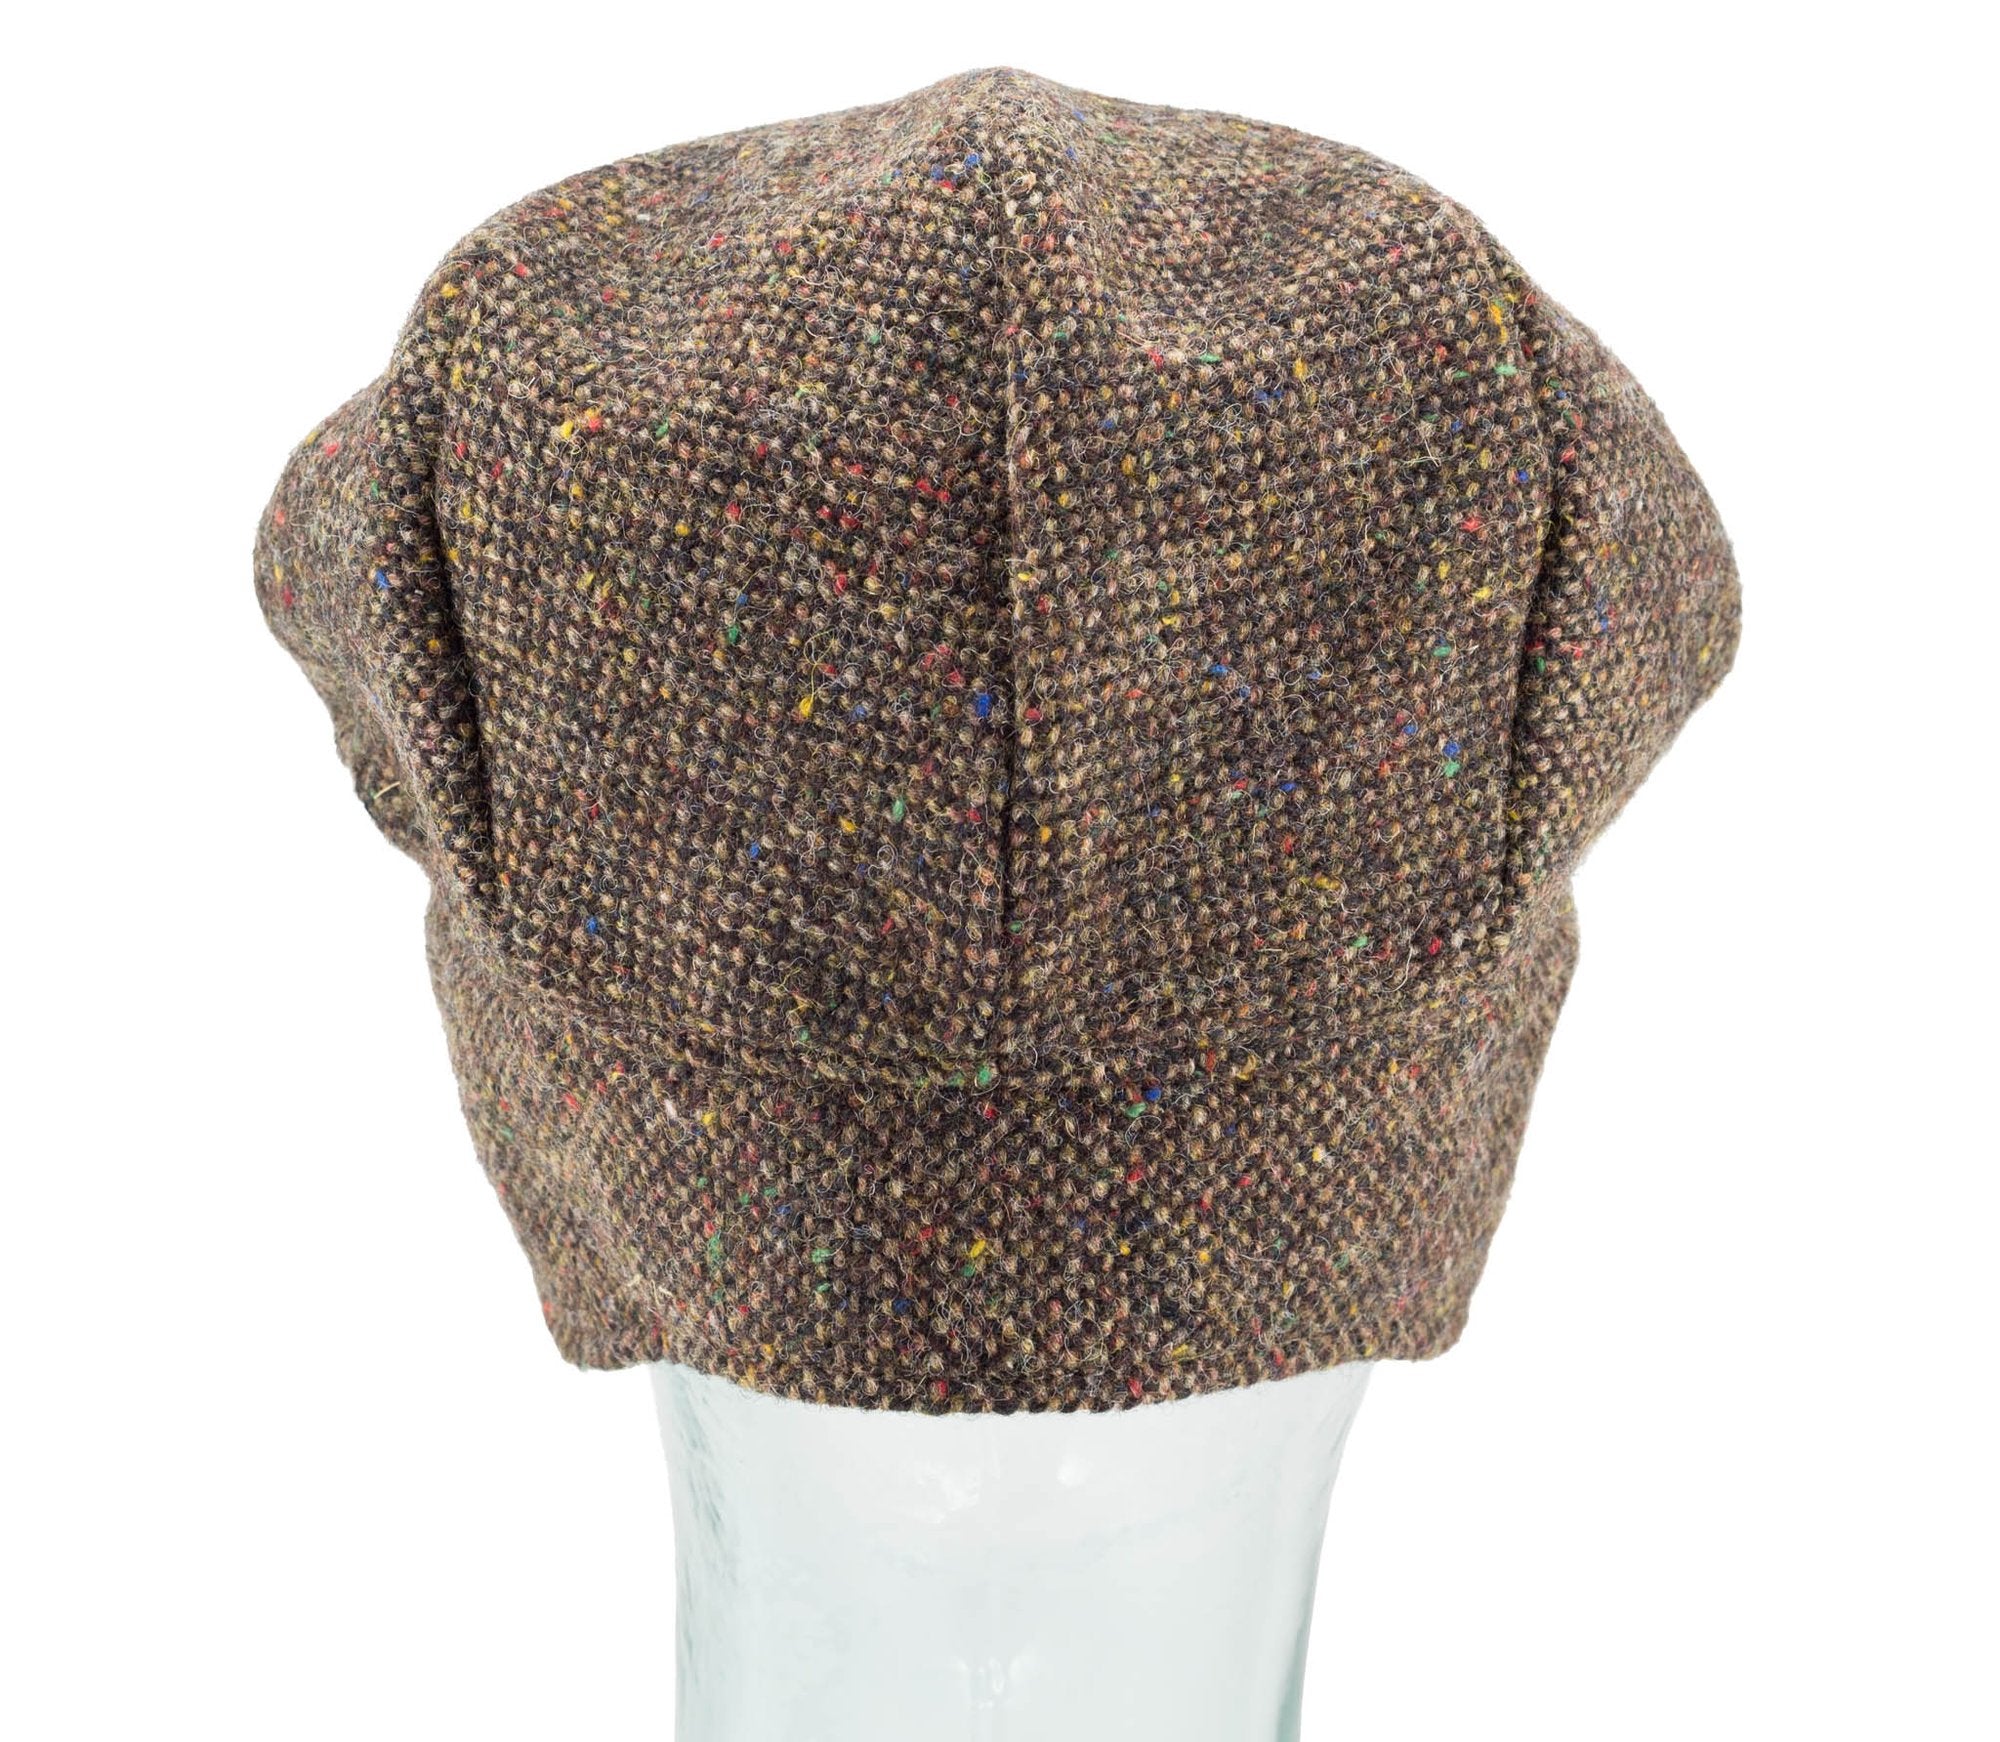 Vintage Style Cap with Earflaps